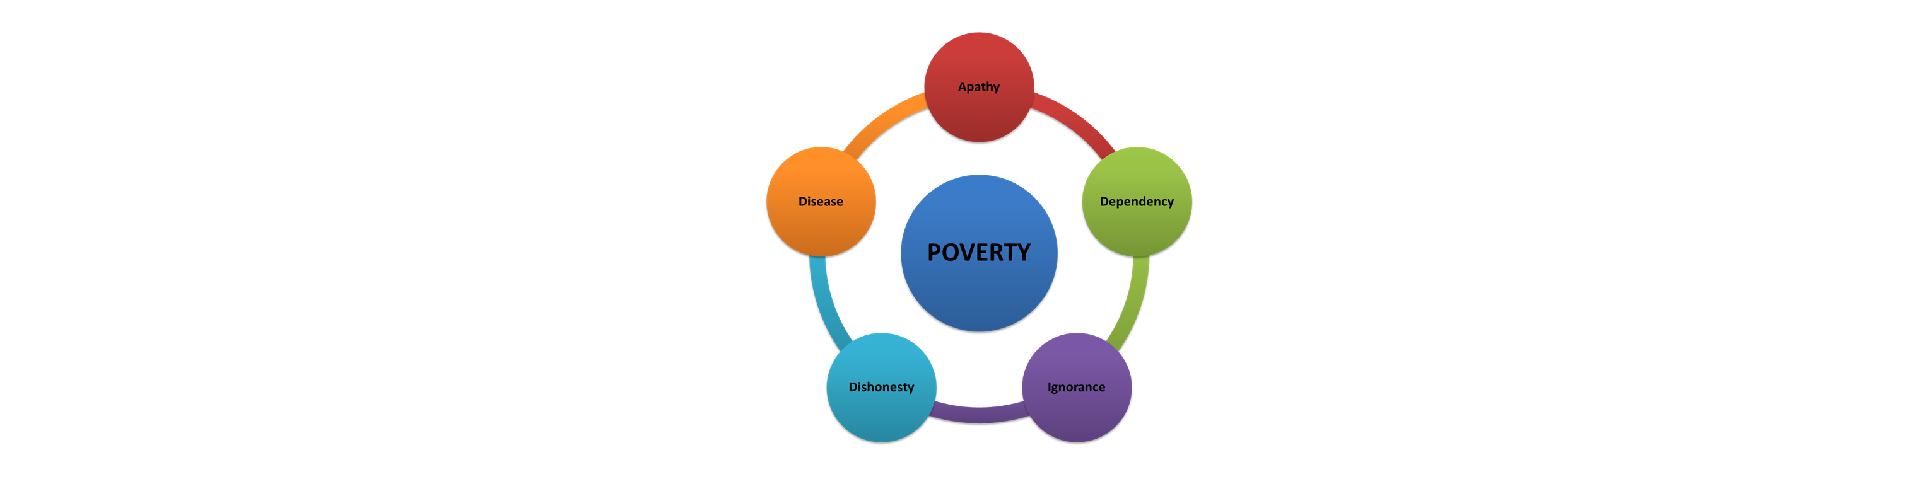 essay the role of charitable organisations in helping society